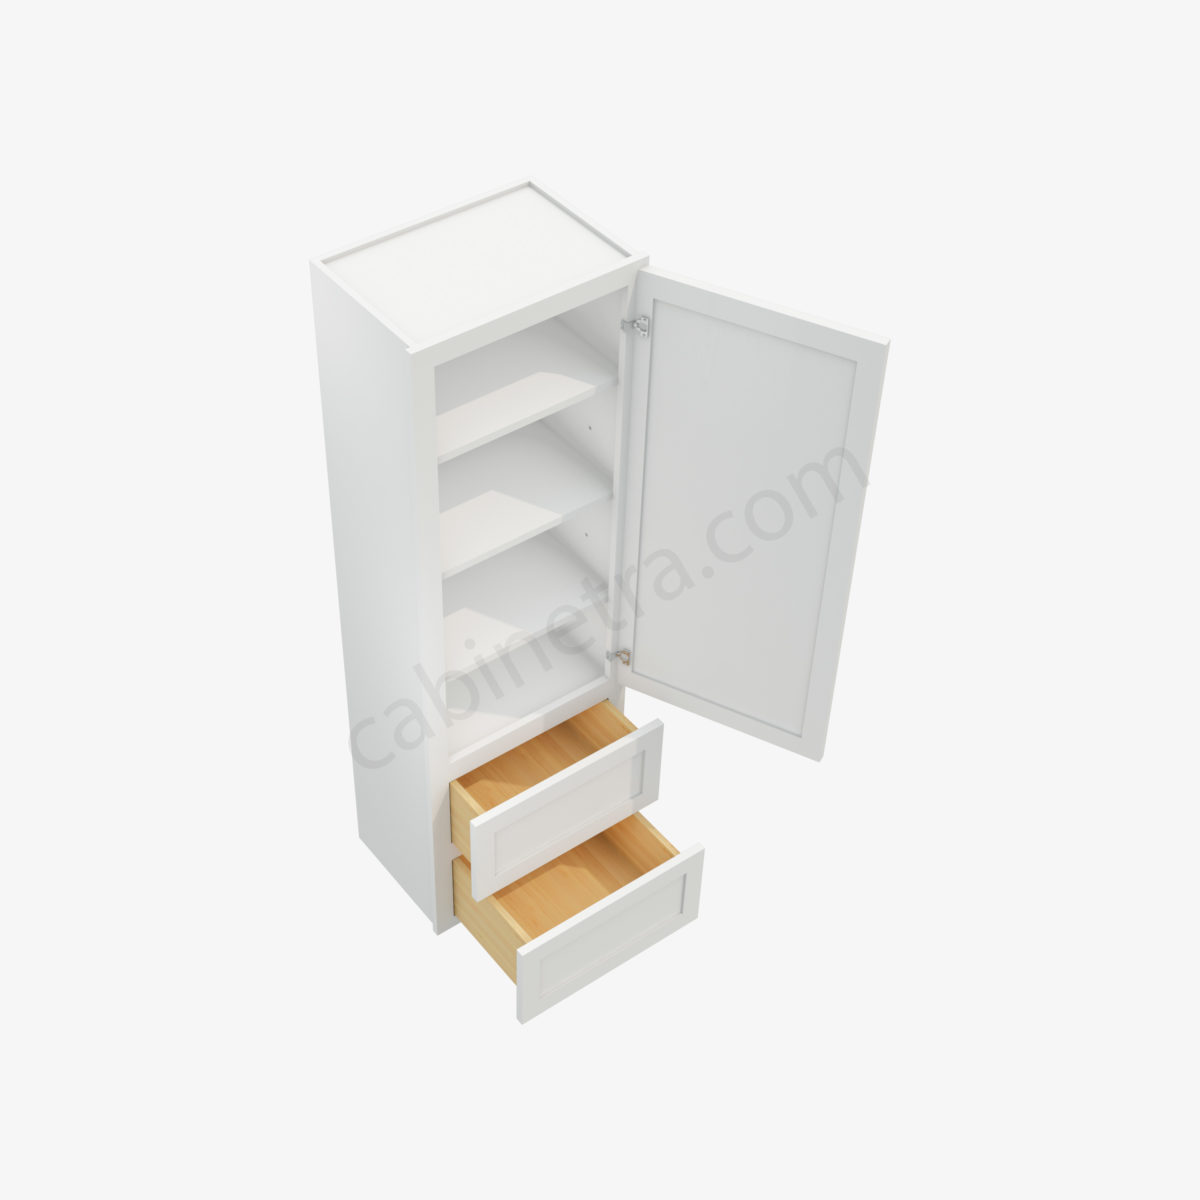 AW W2D1860 2 Forevermark Ice White Shaker Cabinetra scaled